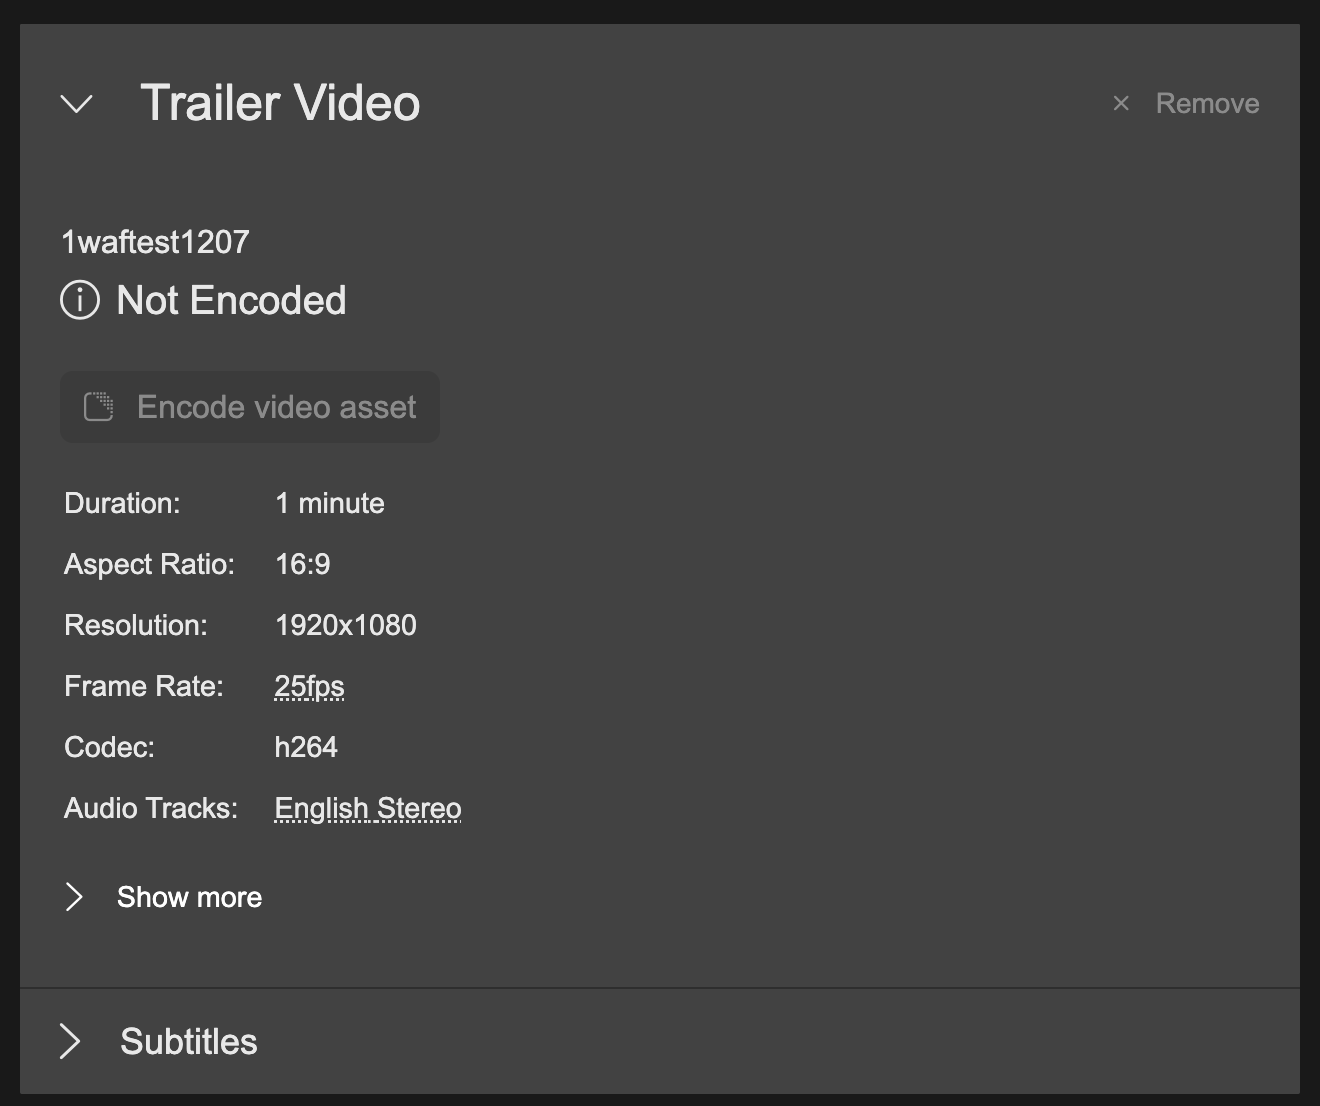 Video media asset information. Click 'Encode video asset' to encode non-encoded assets.